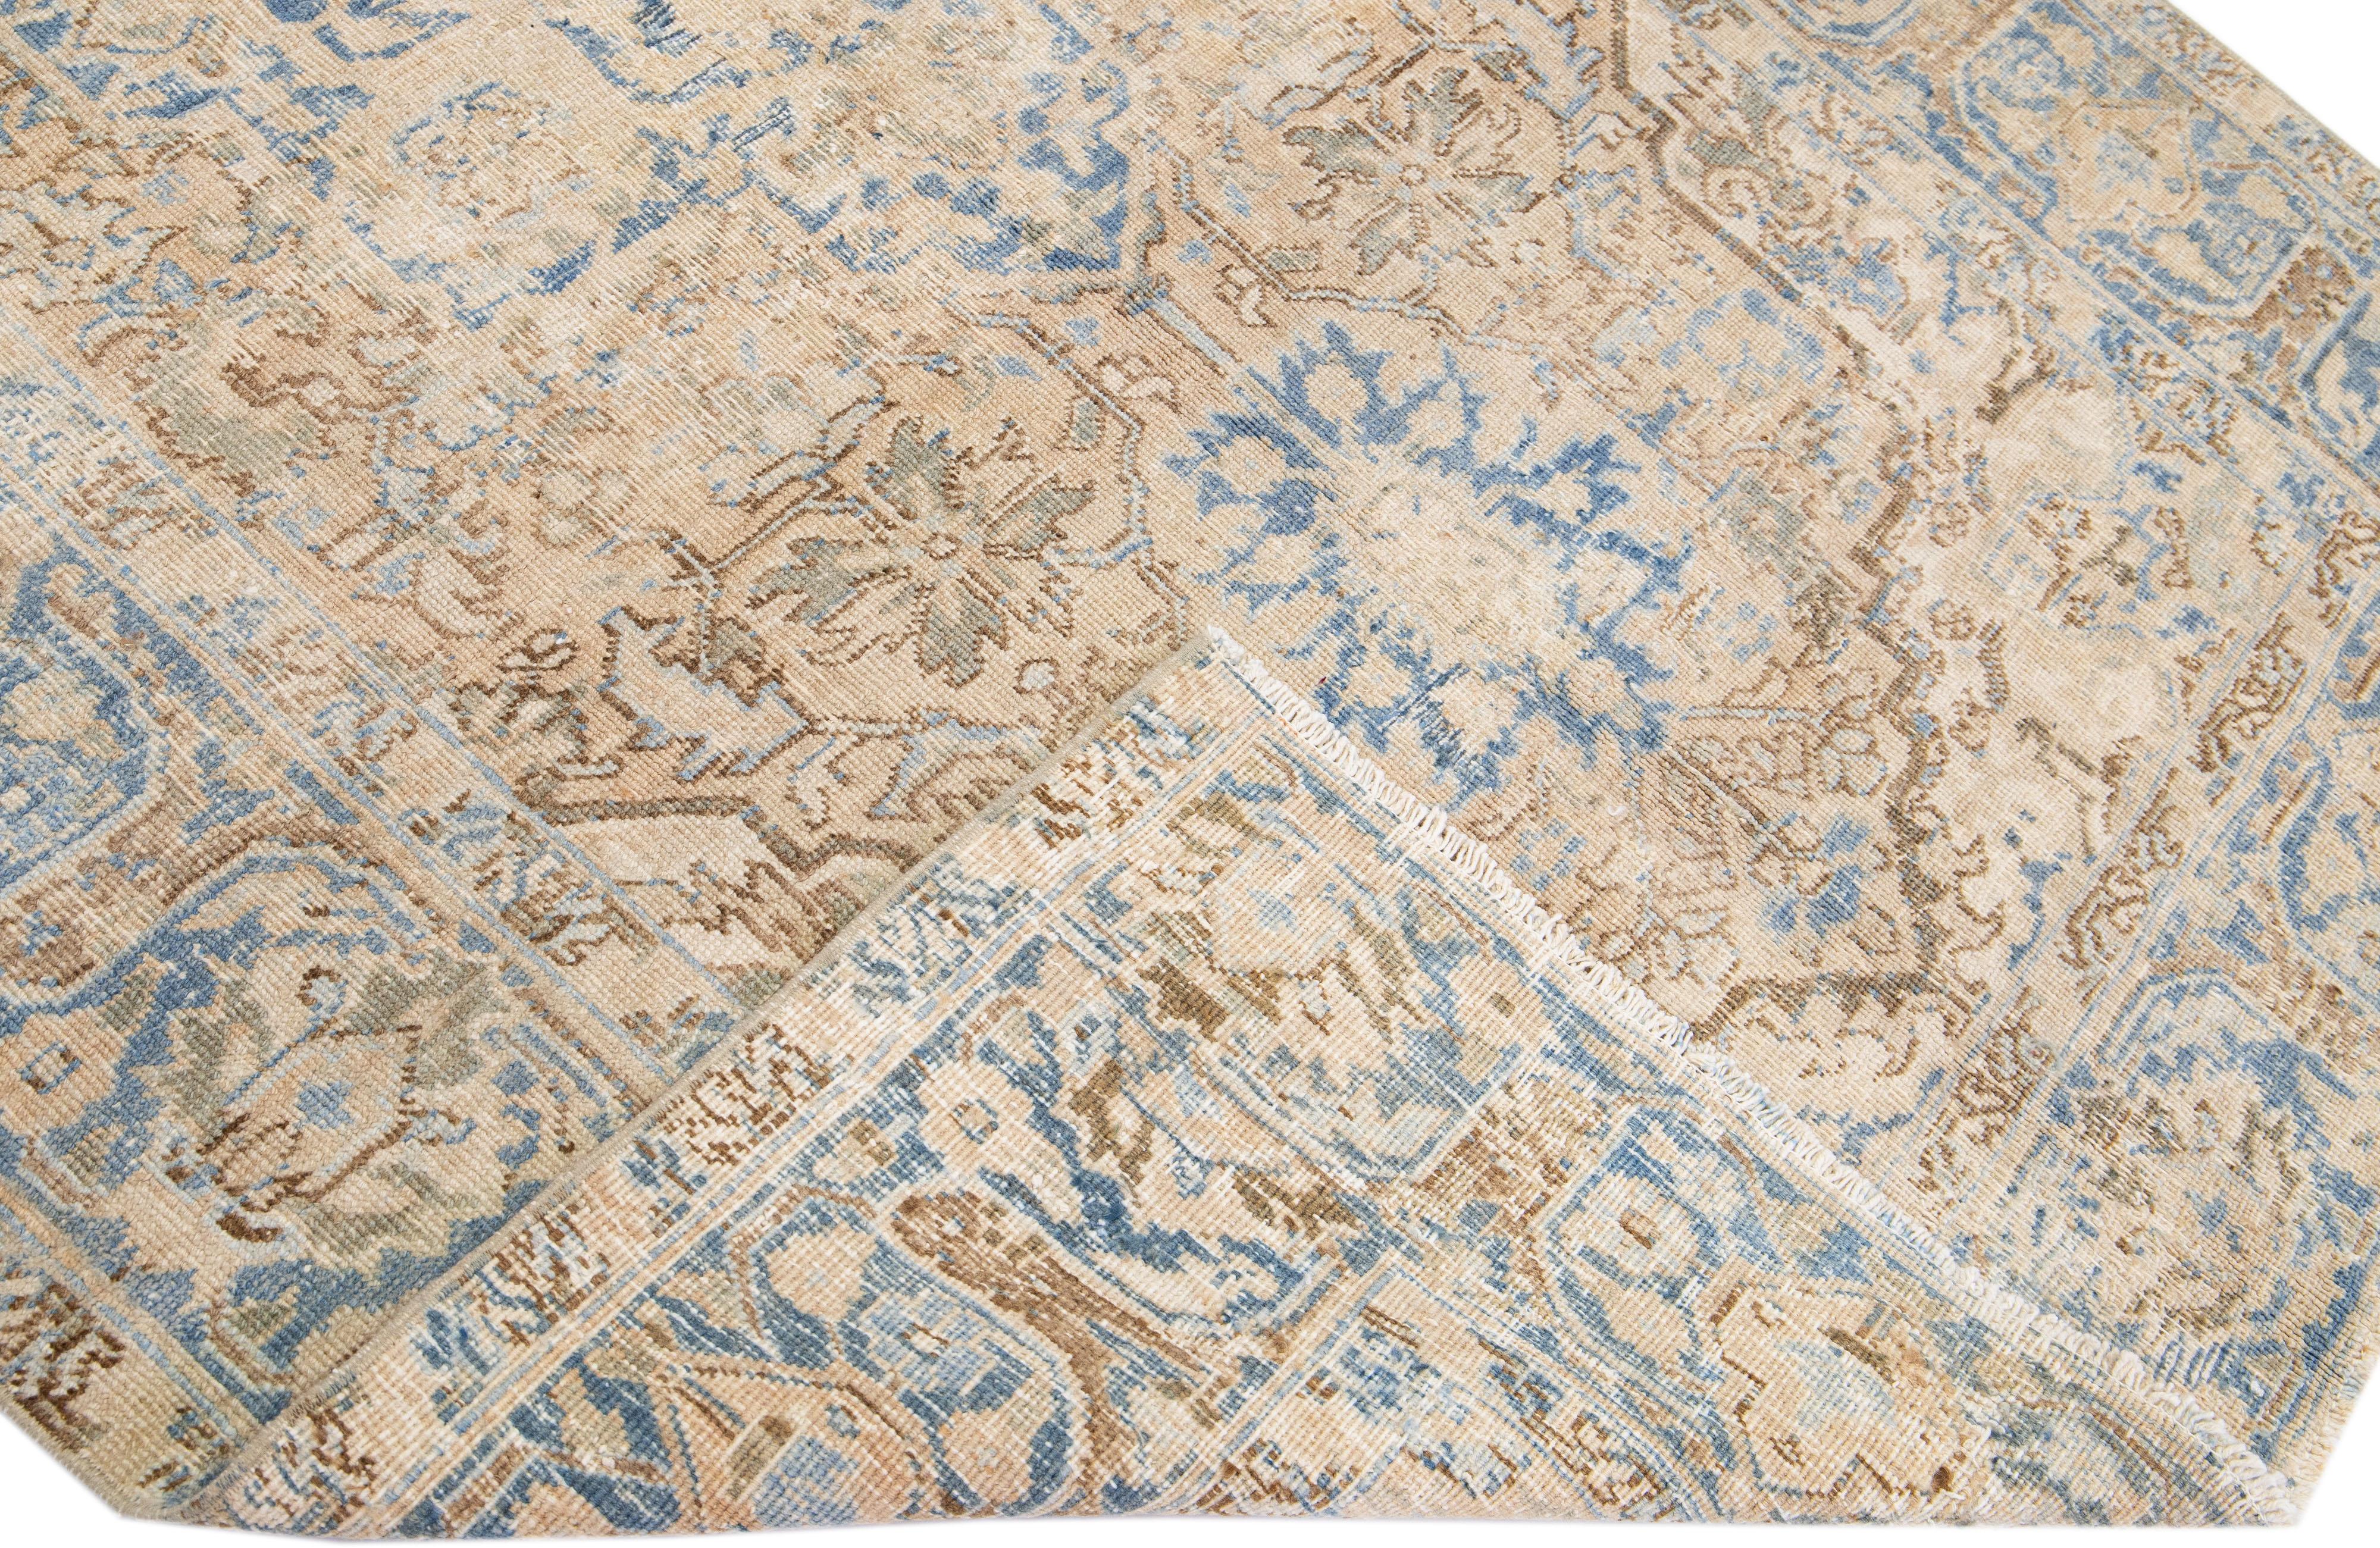 Beautiful antique Heriz hand-knotted wool rug with a beige color field. This Persian rug has a blue frame and accents in a gorgeous all-over geometric medallion design.

This rug measures: 5'8